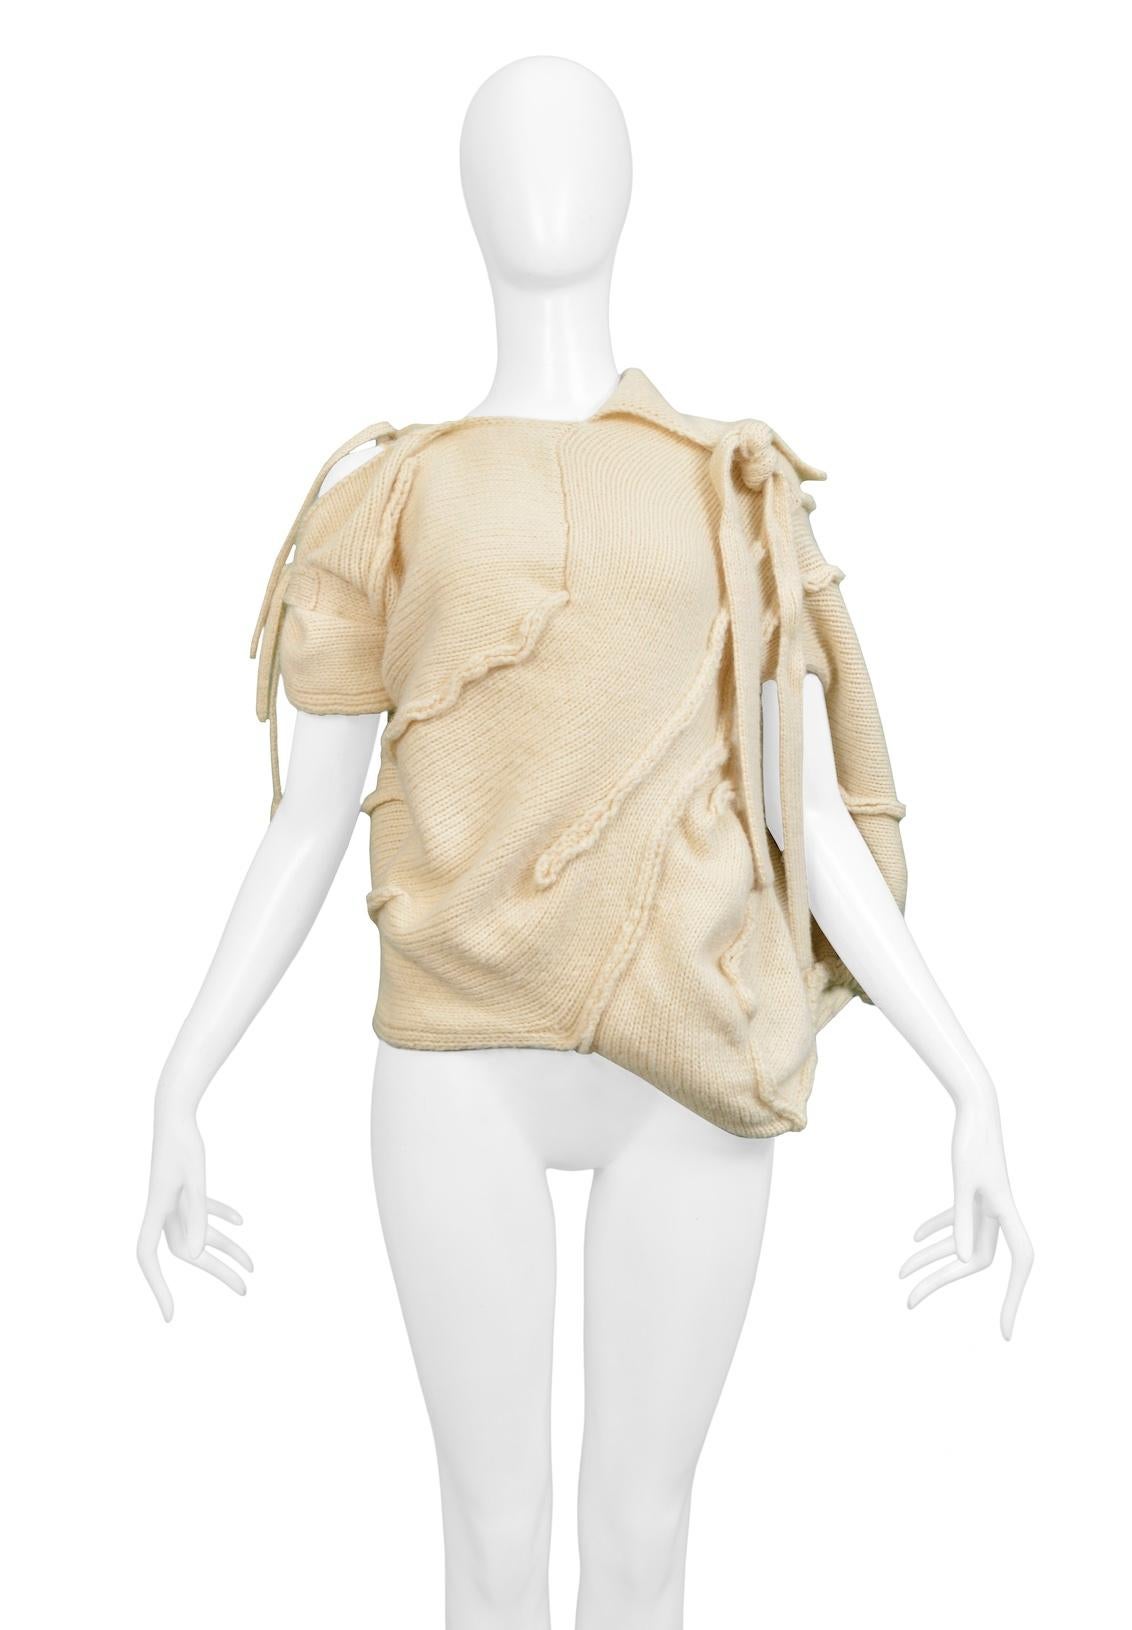 Resurrection Vintage is excited to offer a vintage Tao for Comme des Garcons off-white knit sweater top featuring a cocoon body, tie sleeves and neckline, and asymmetrical seaming.

Tao For Comme Des Garcons
Size: Small/Medium
Fabric: Wool
2008